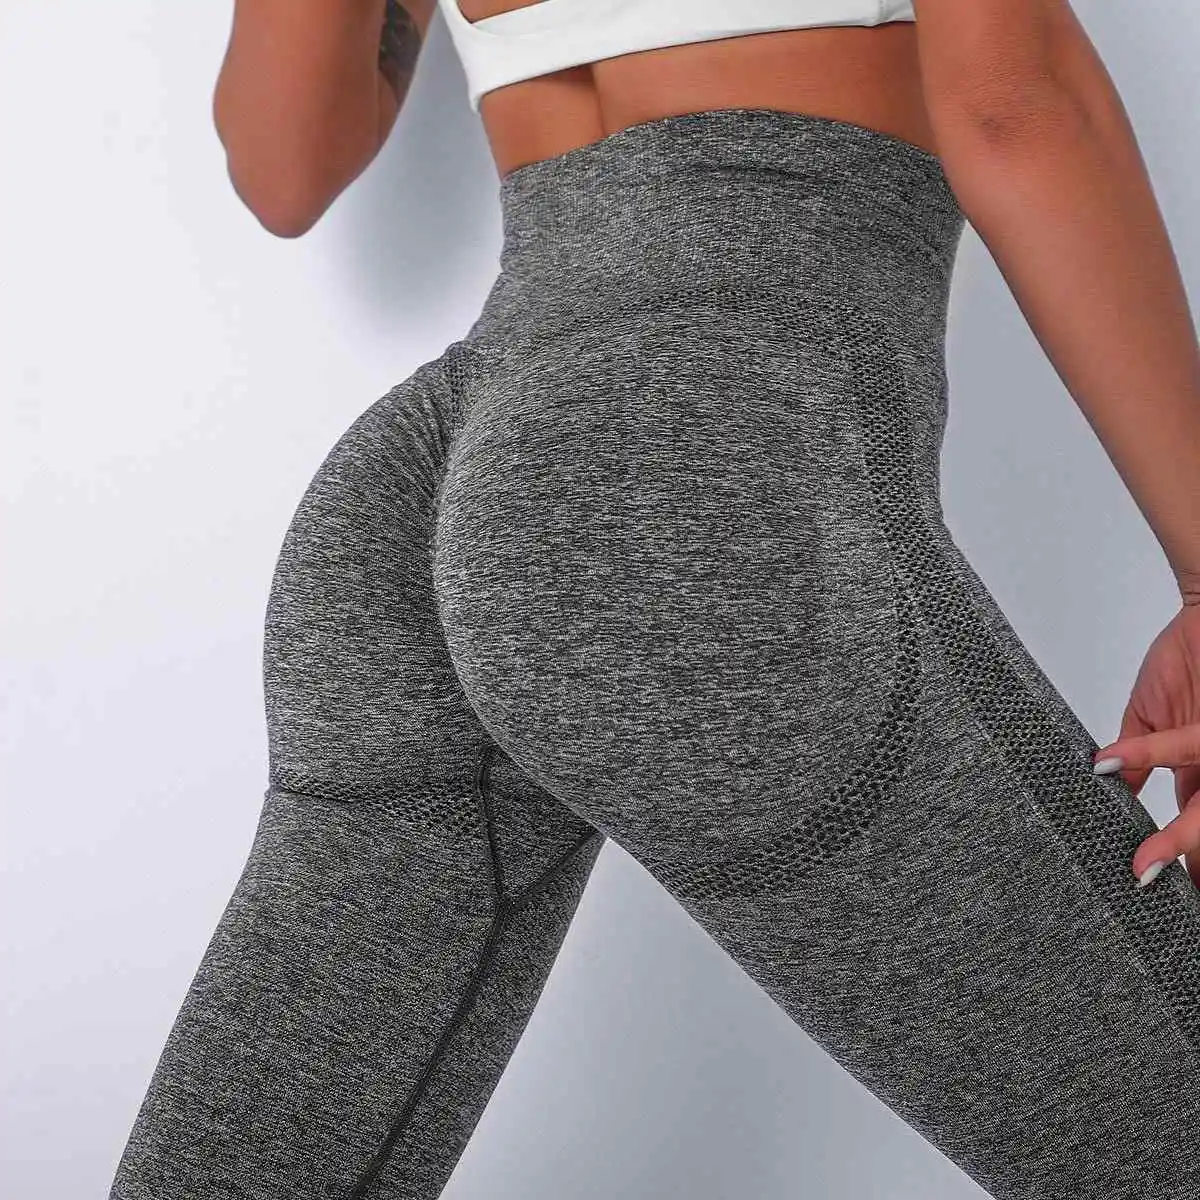 

2021 Hot selling Women Fitness Workout Seamless Scrunch Booty Butt Leggings, As pictured